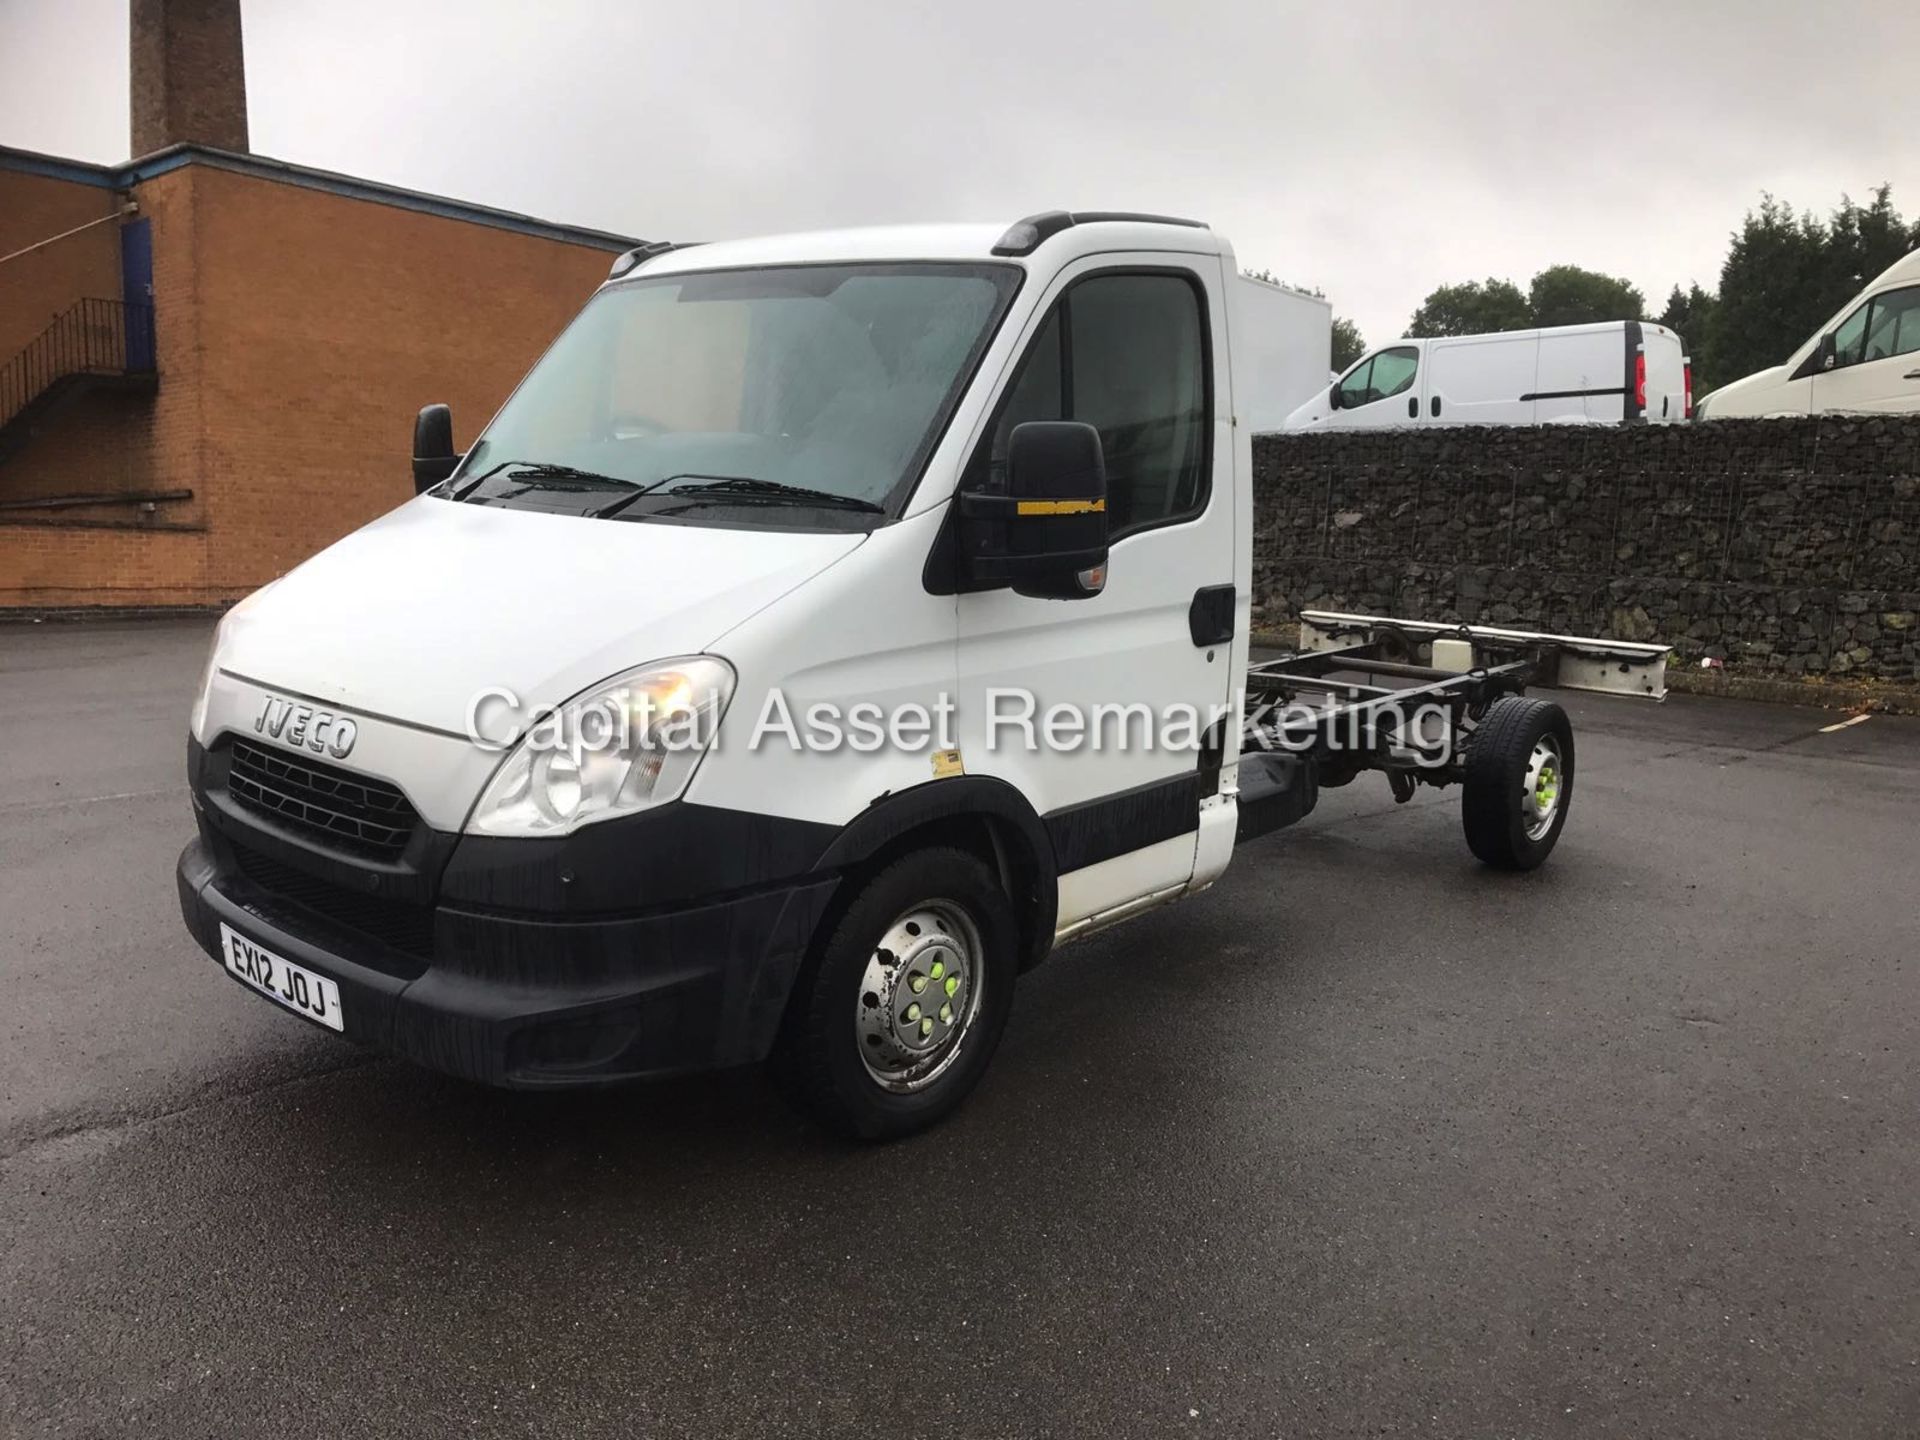 (ON SALE) IVECO DAILY 2.3HPI 35S11 (12 REG) LWB CHASSIS CAB - IDEAL RECOVERY /TRANSPORTER CONVERSION